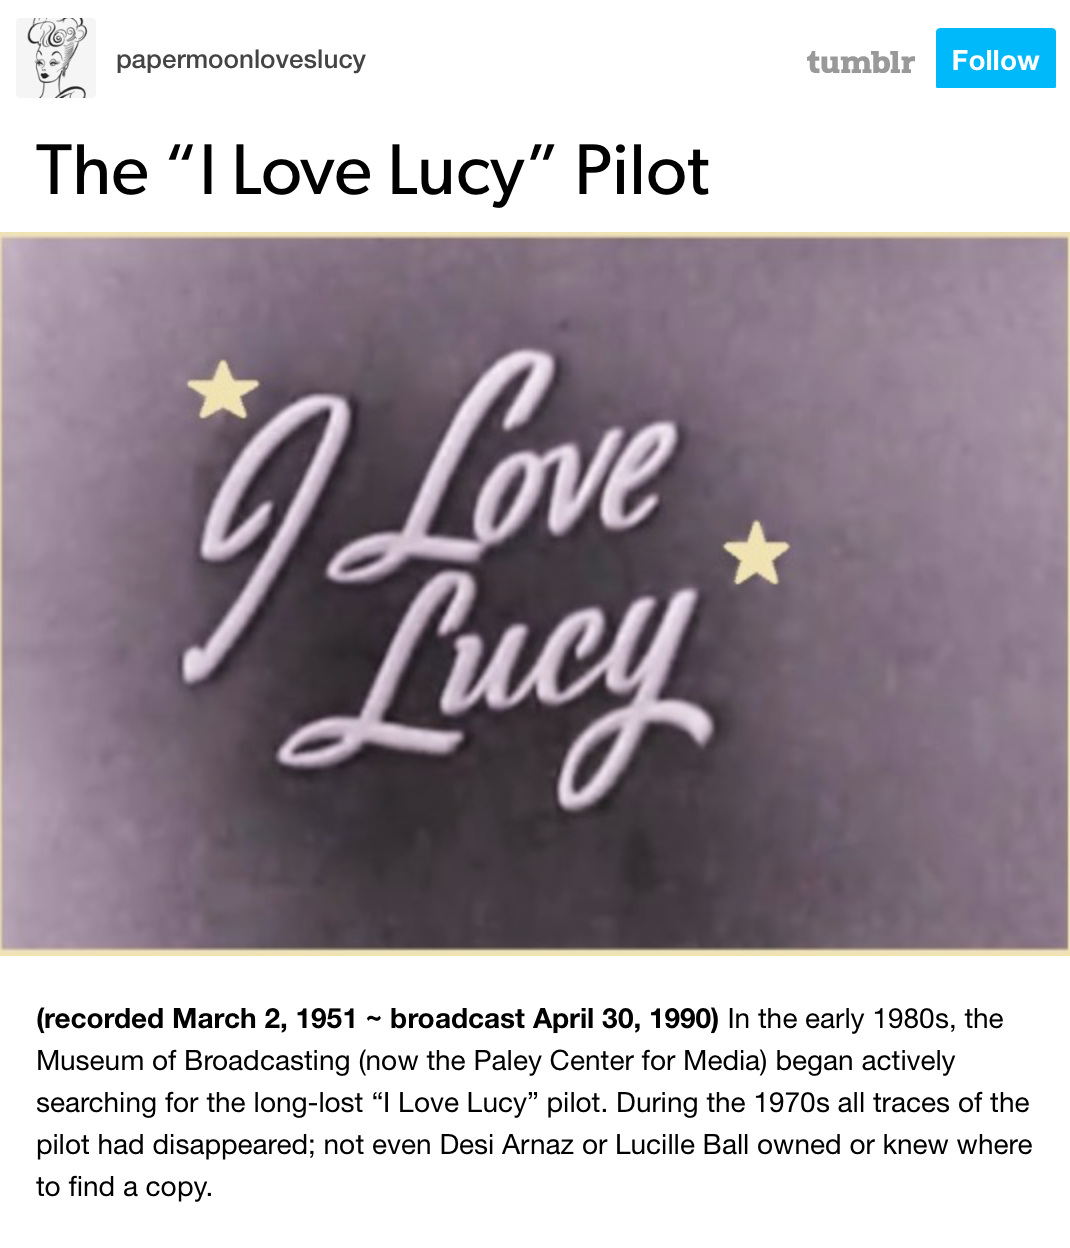 Papermoon Loves Lucy: The “I Love Lucy” Pilot